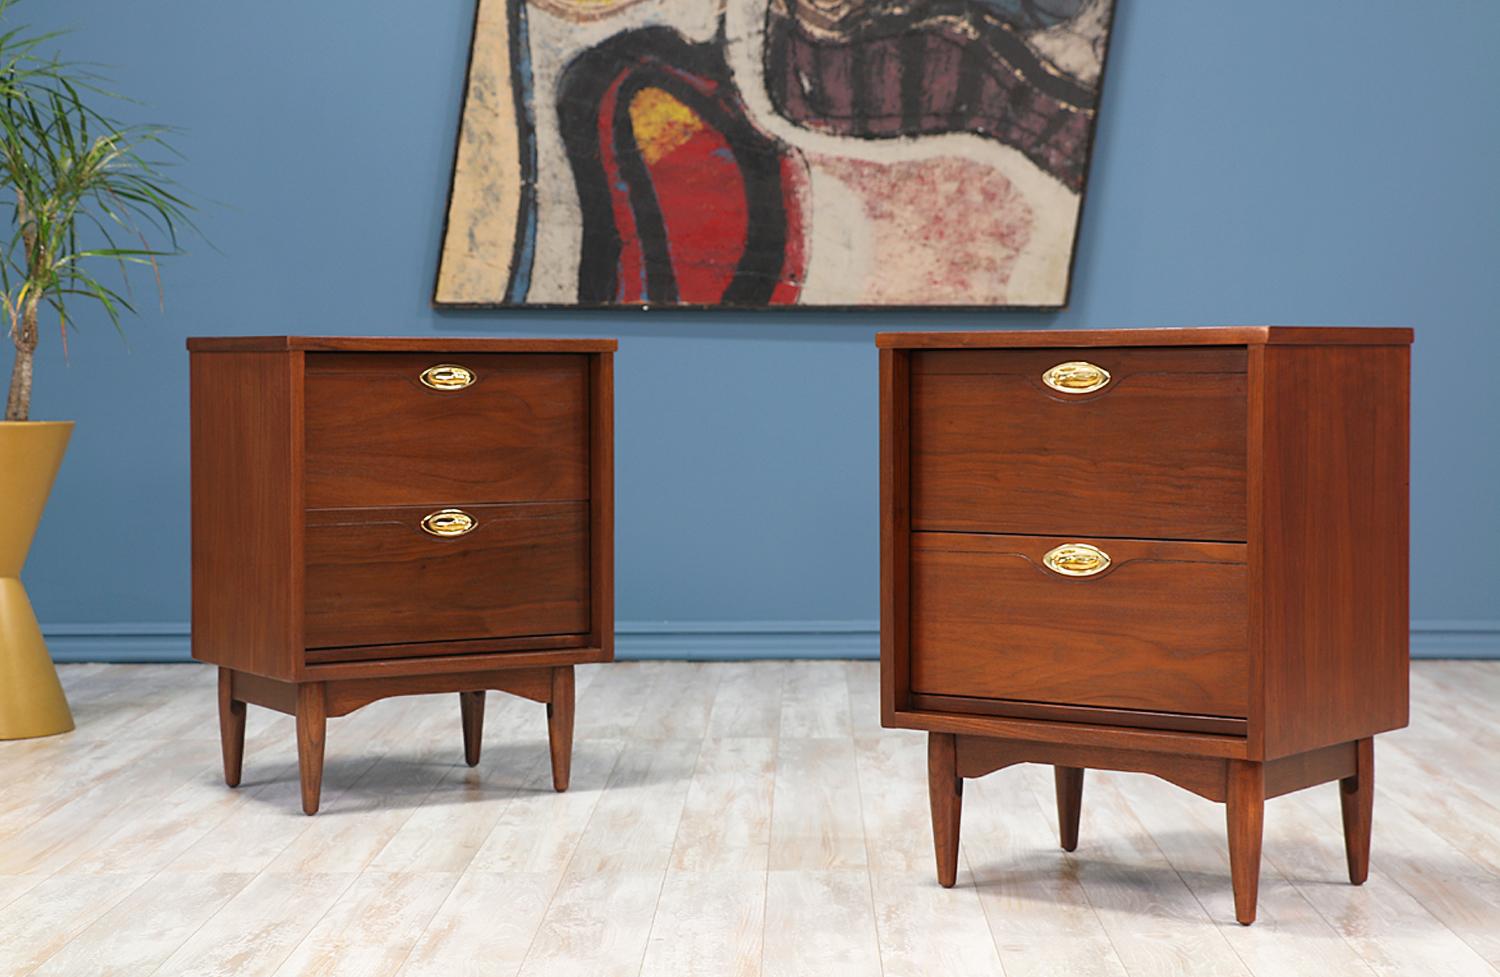 Pair of Mid-Century Modern nightstands manufactured by Hooker in the United States, circa 1960s. Crafted for Hooker’s “Mainline” collection, these nightstands feature a solid walnut wood base and a casing featuring two dovetailed drawers adorned